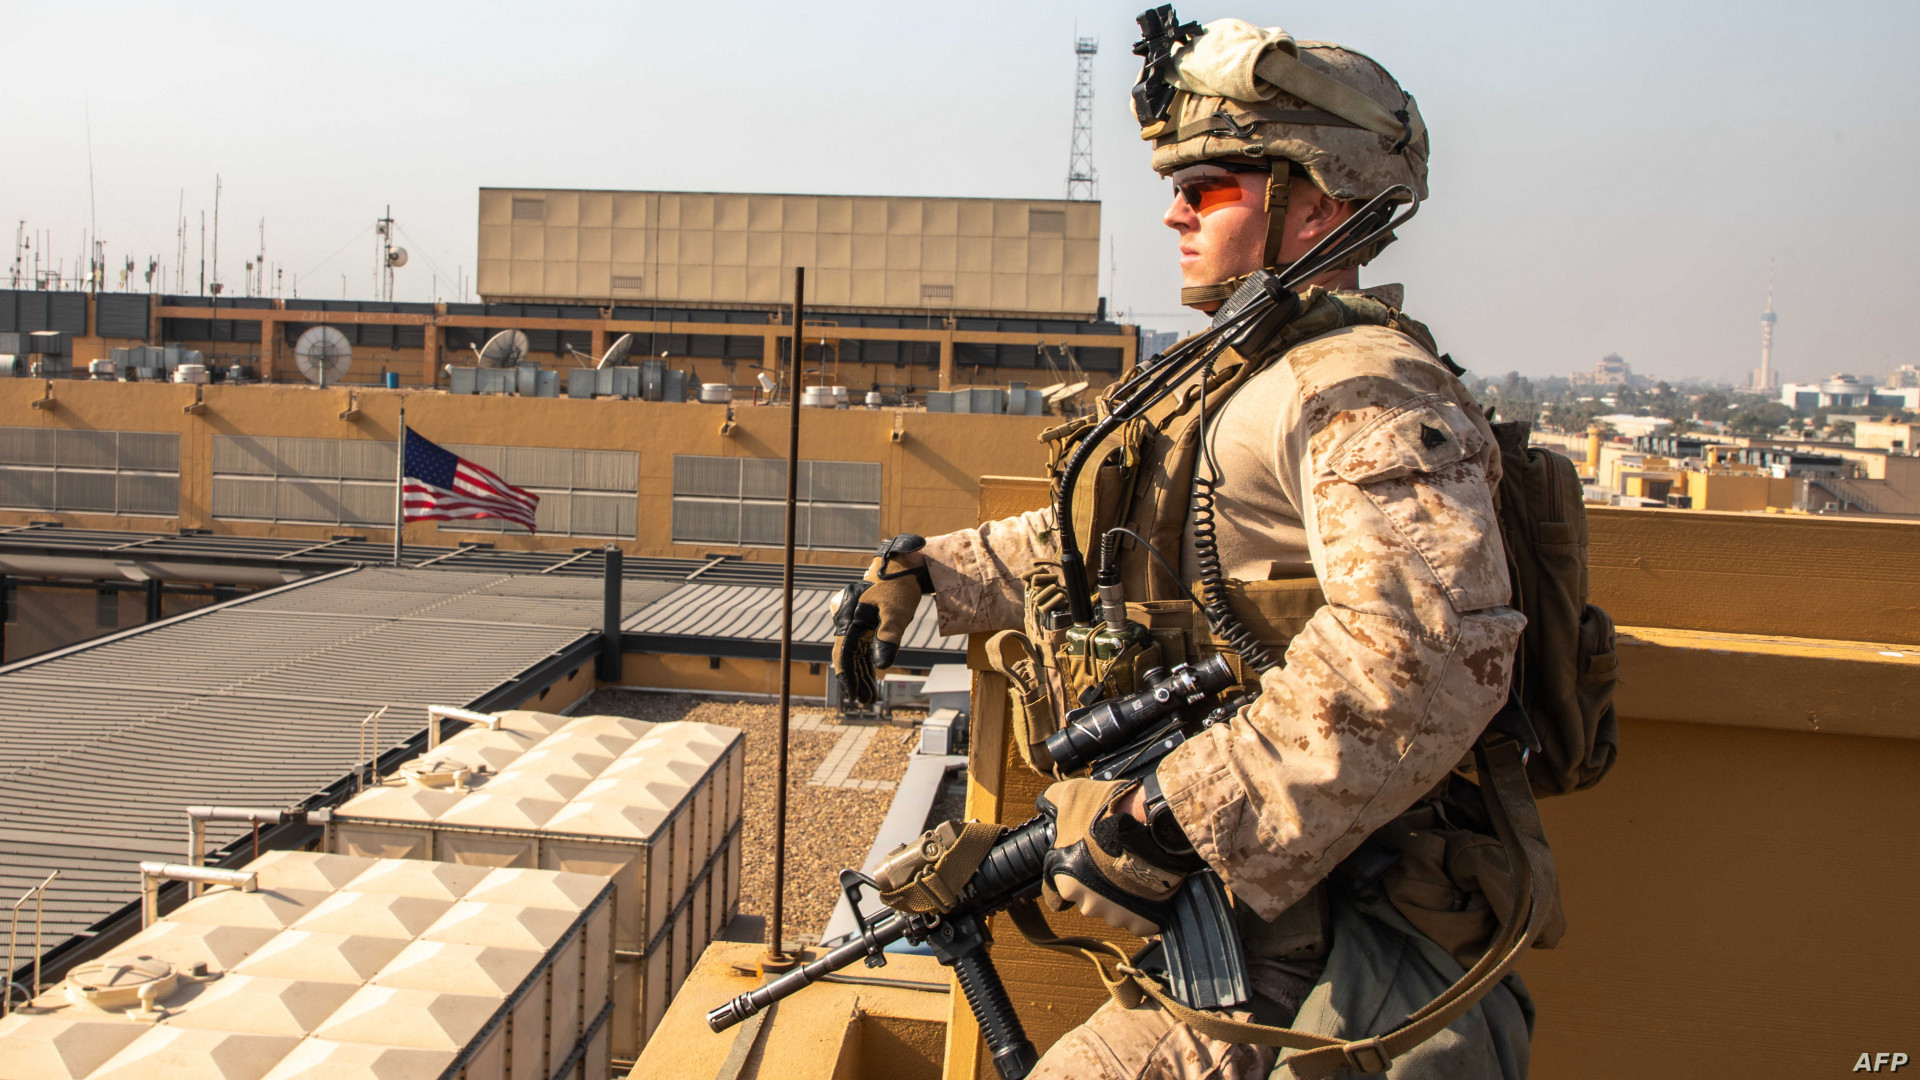 Reducing the US embassy staff in Baghdad will not affect the US-Iraqi relations, Schenker says